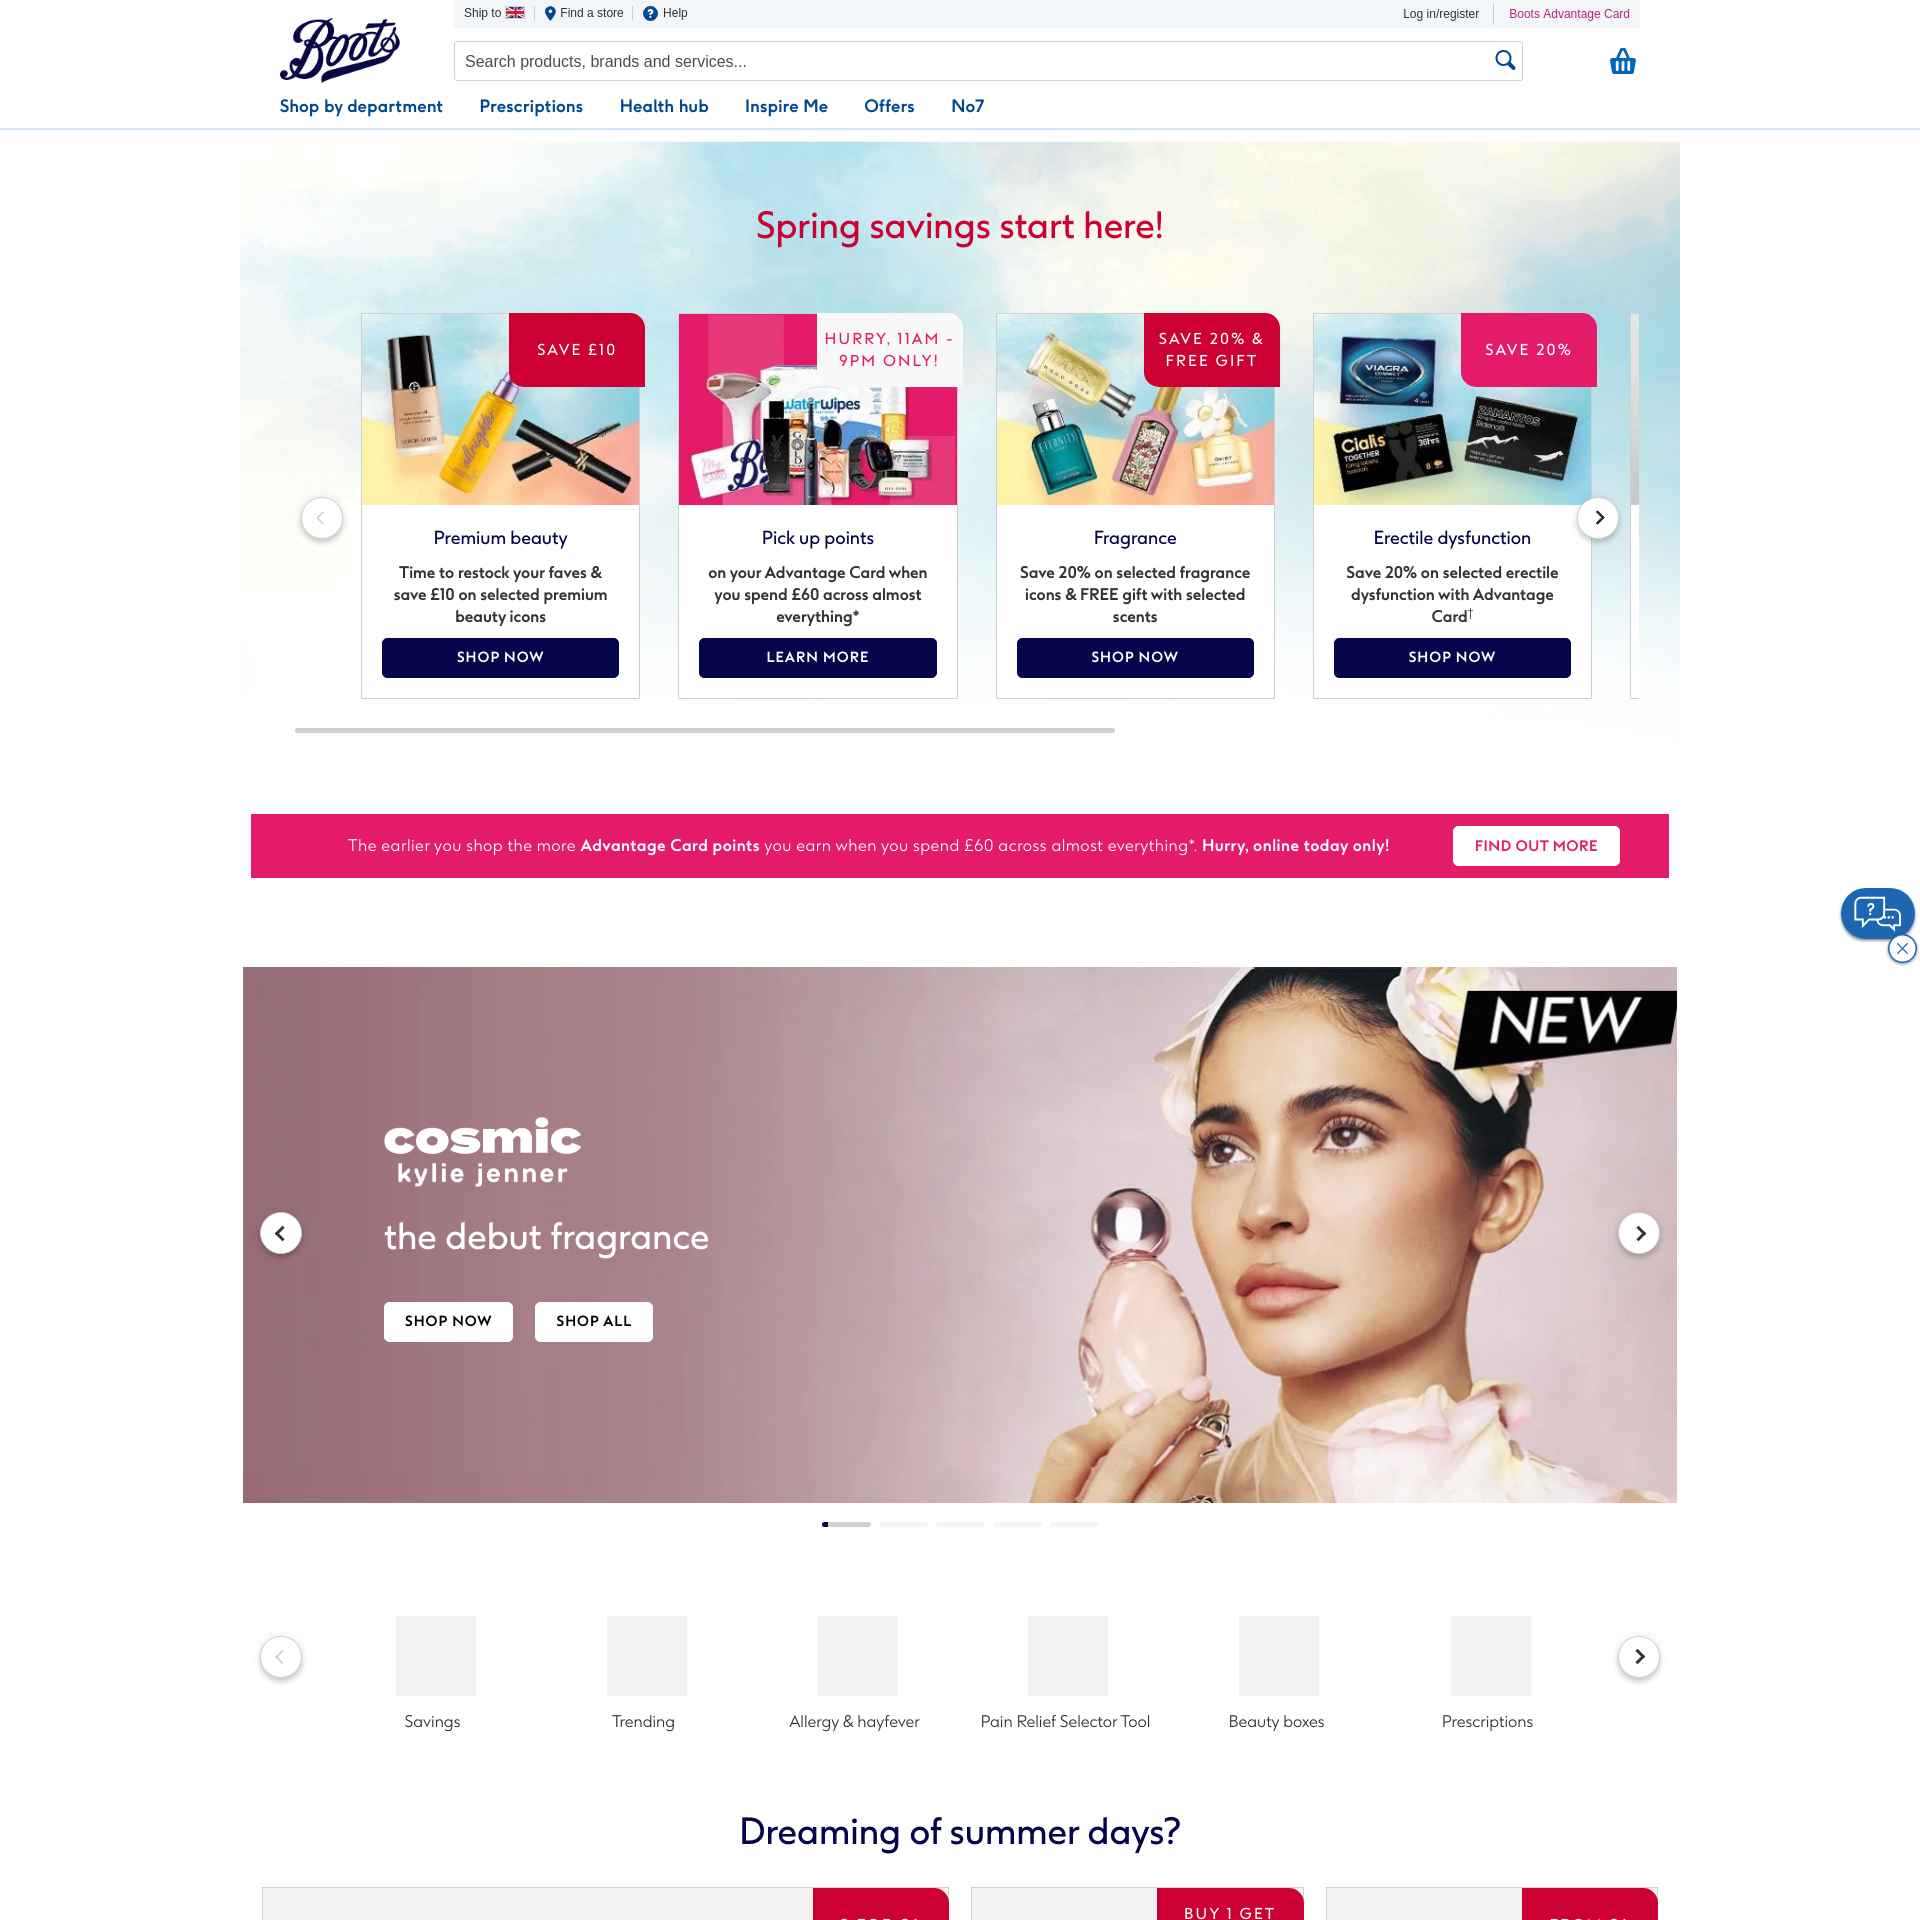 Popular Online Retailer Boots.com Faces Competition from New Players in the Market